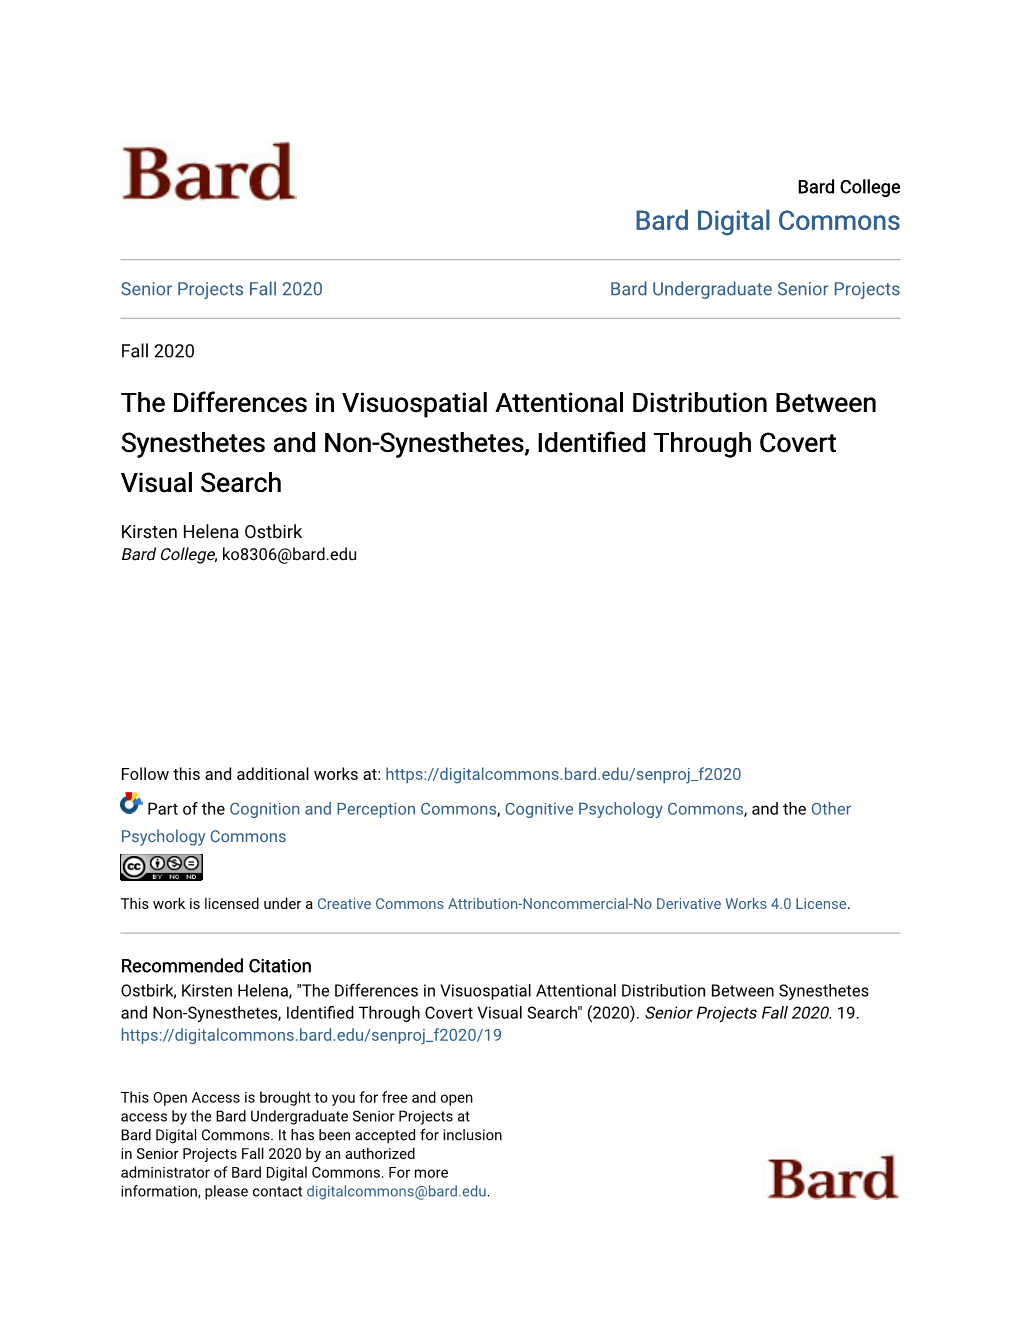 The Differences in Visuospatial Attentional Distribution Between Synesthetes and Non-Synesthetes, Identified Through Covert Visual Search